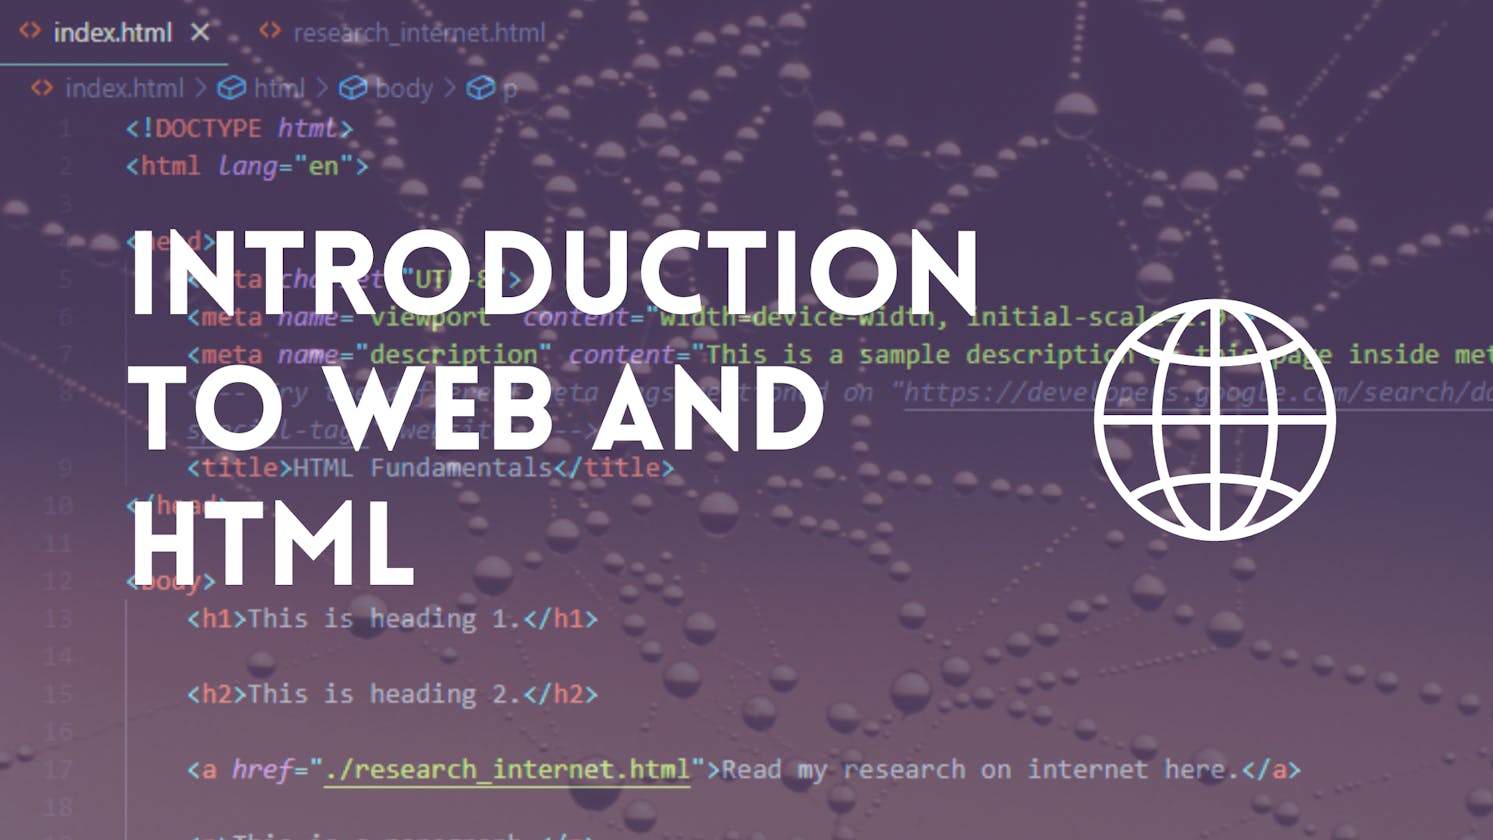 A brief introduction to Web and HTML